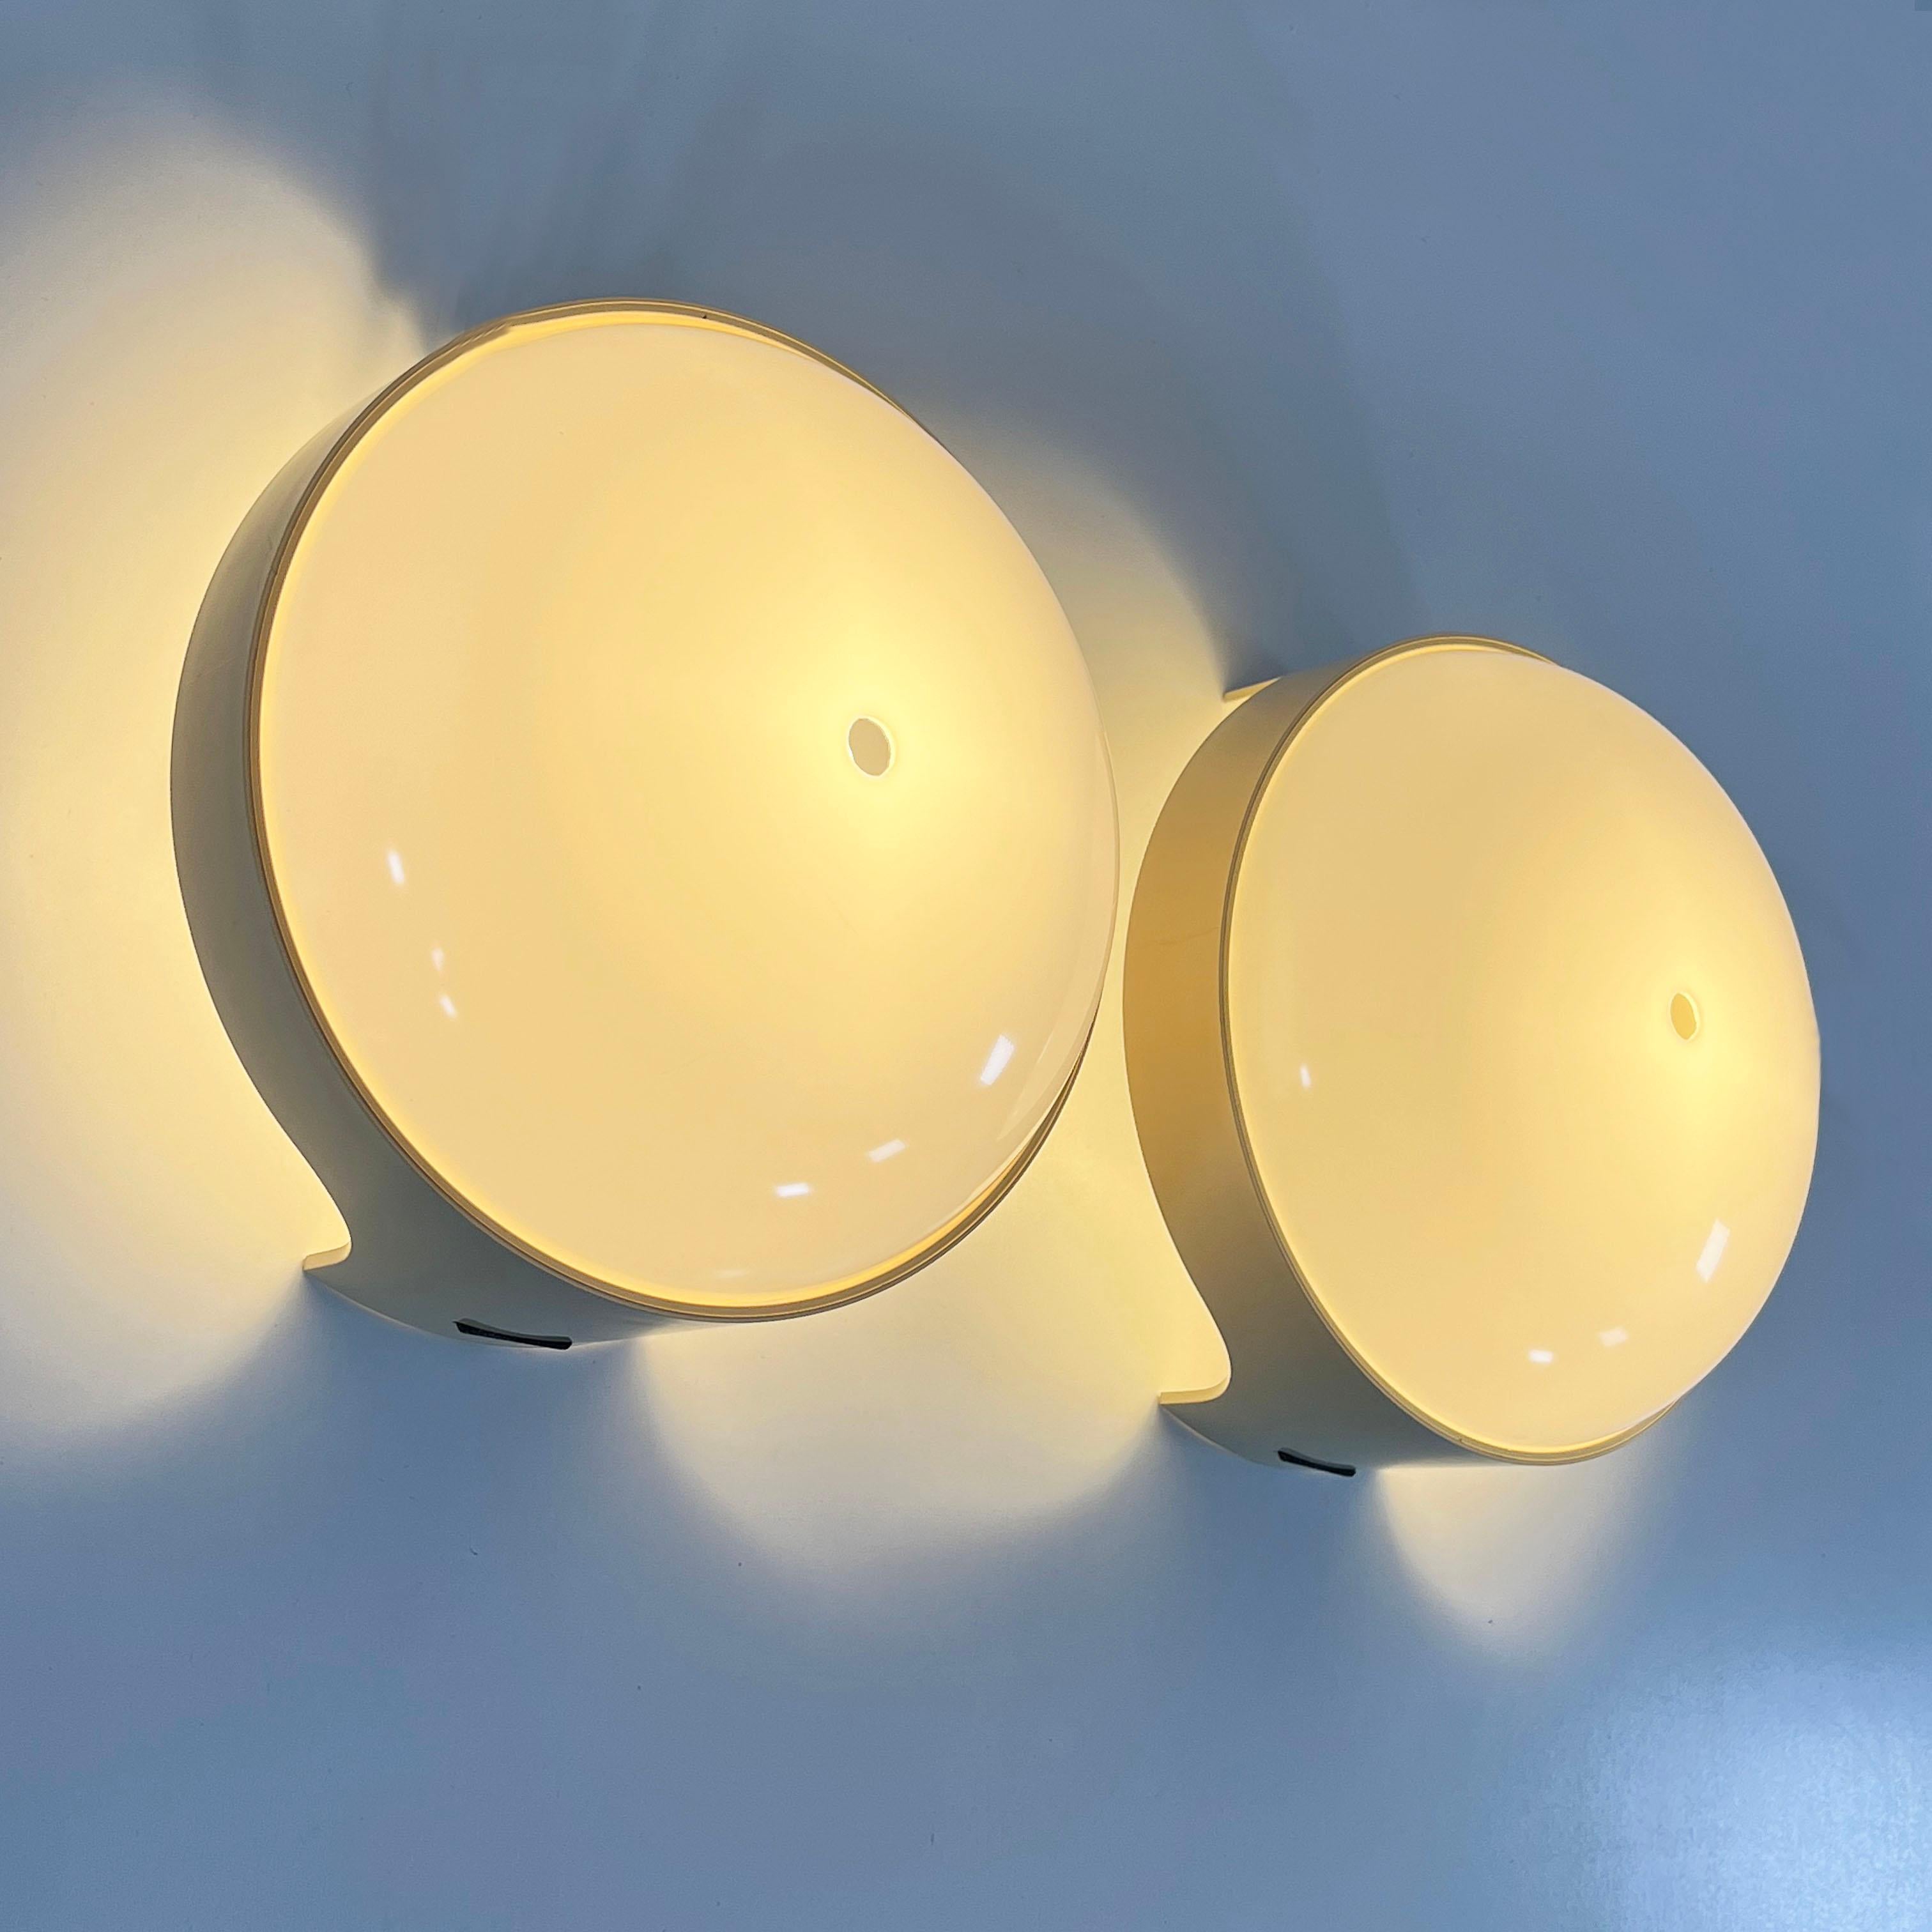 Italian Pair of Quattro KD 4335 Wall Lamps by Joe Colombo for Kartell, 1960 For Sale